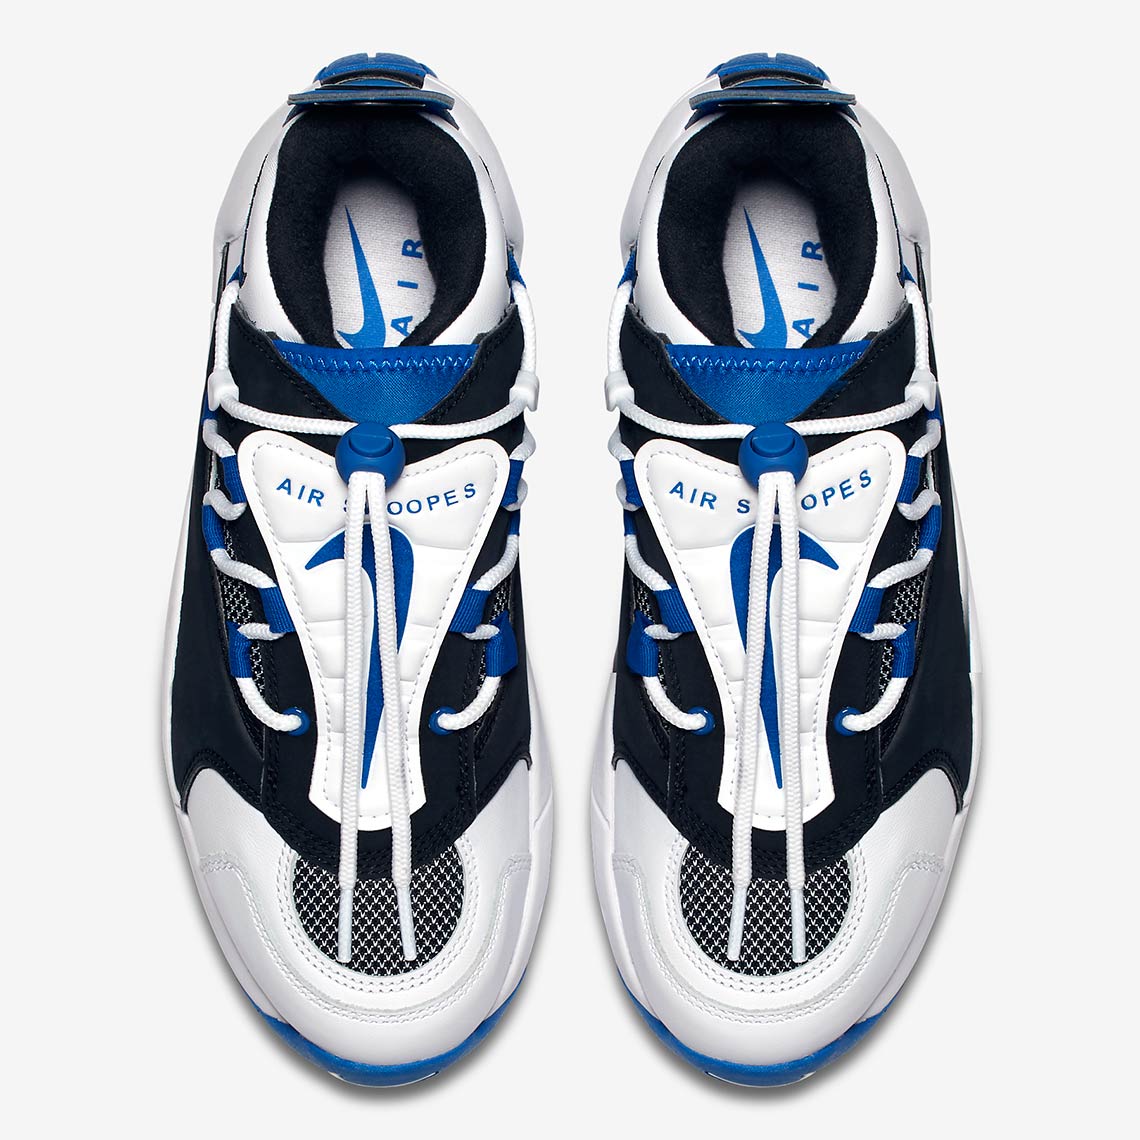 Nike Air Swoopes 2 917592-101 + 917592 